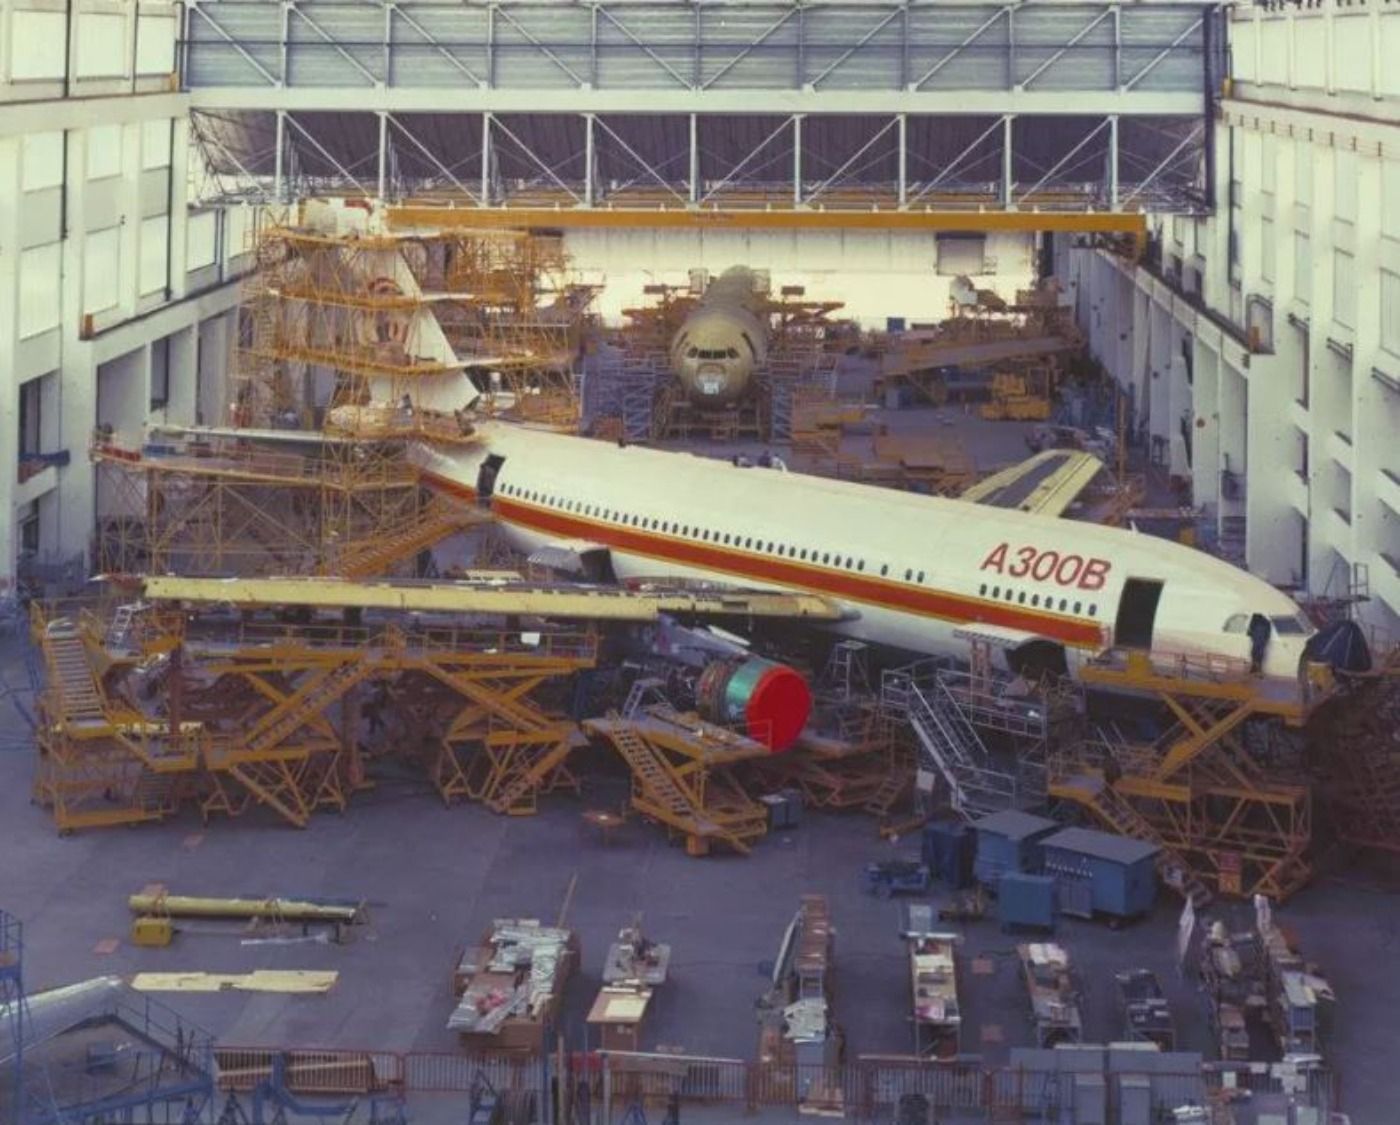 An Airbus A300B being manufactured in a facility.